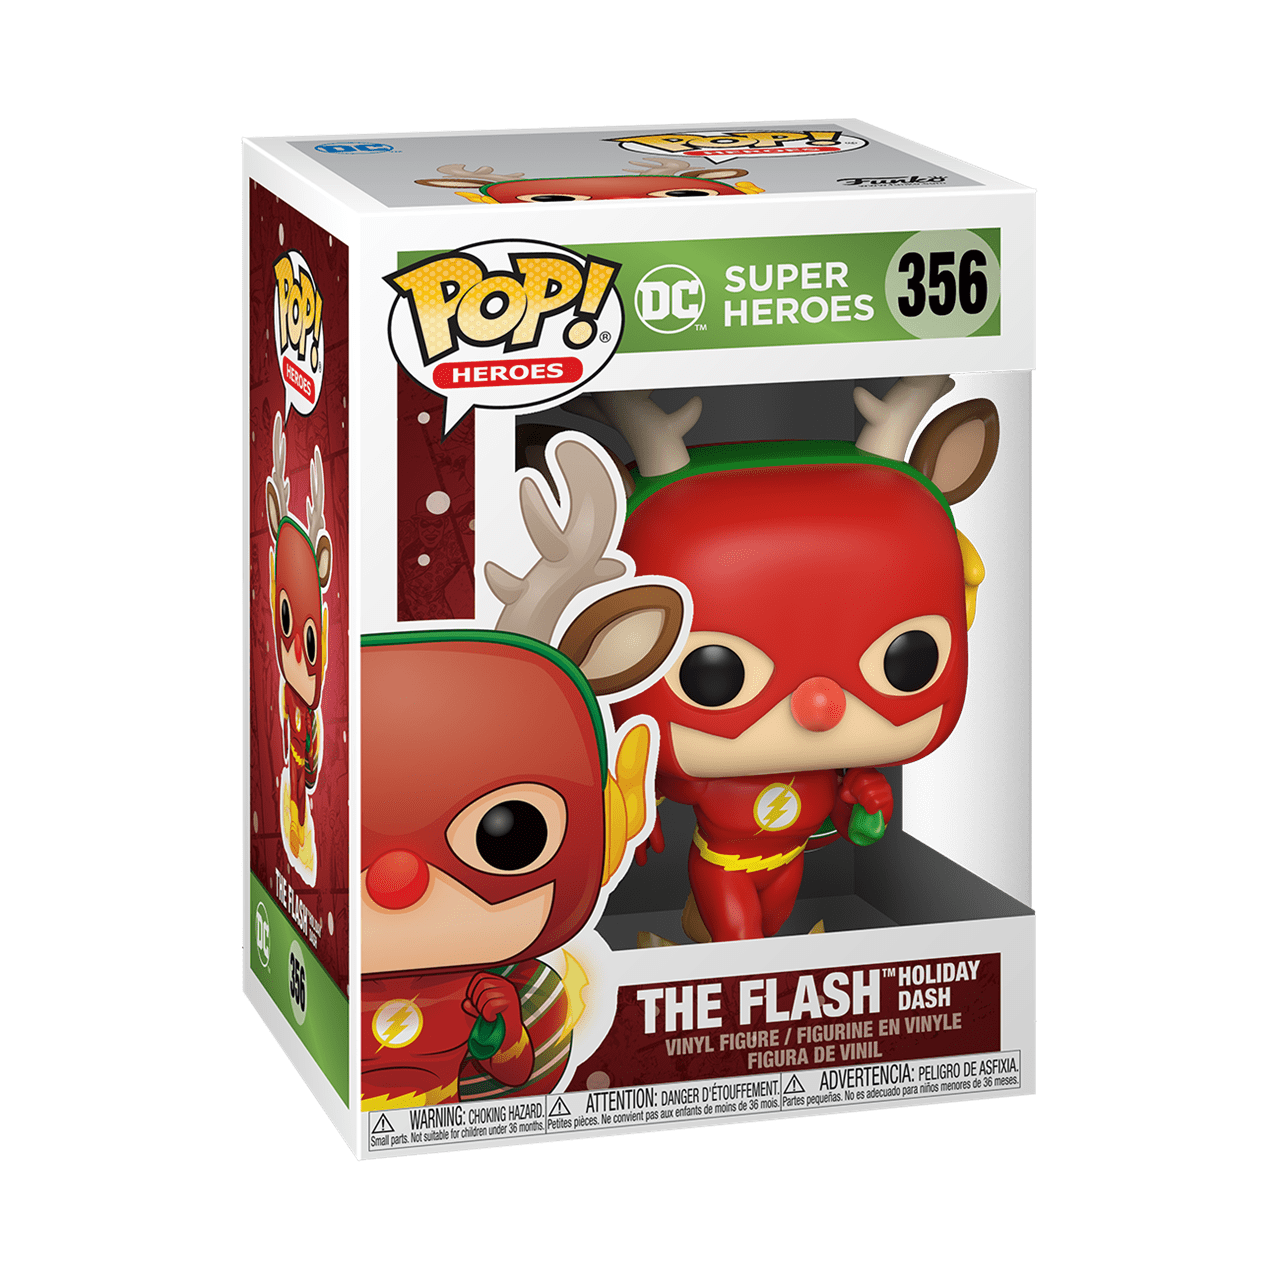 Funko POP ! - DC Super Heroes 356 - The Flash Holiday Dash